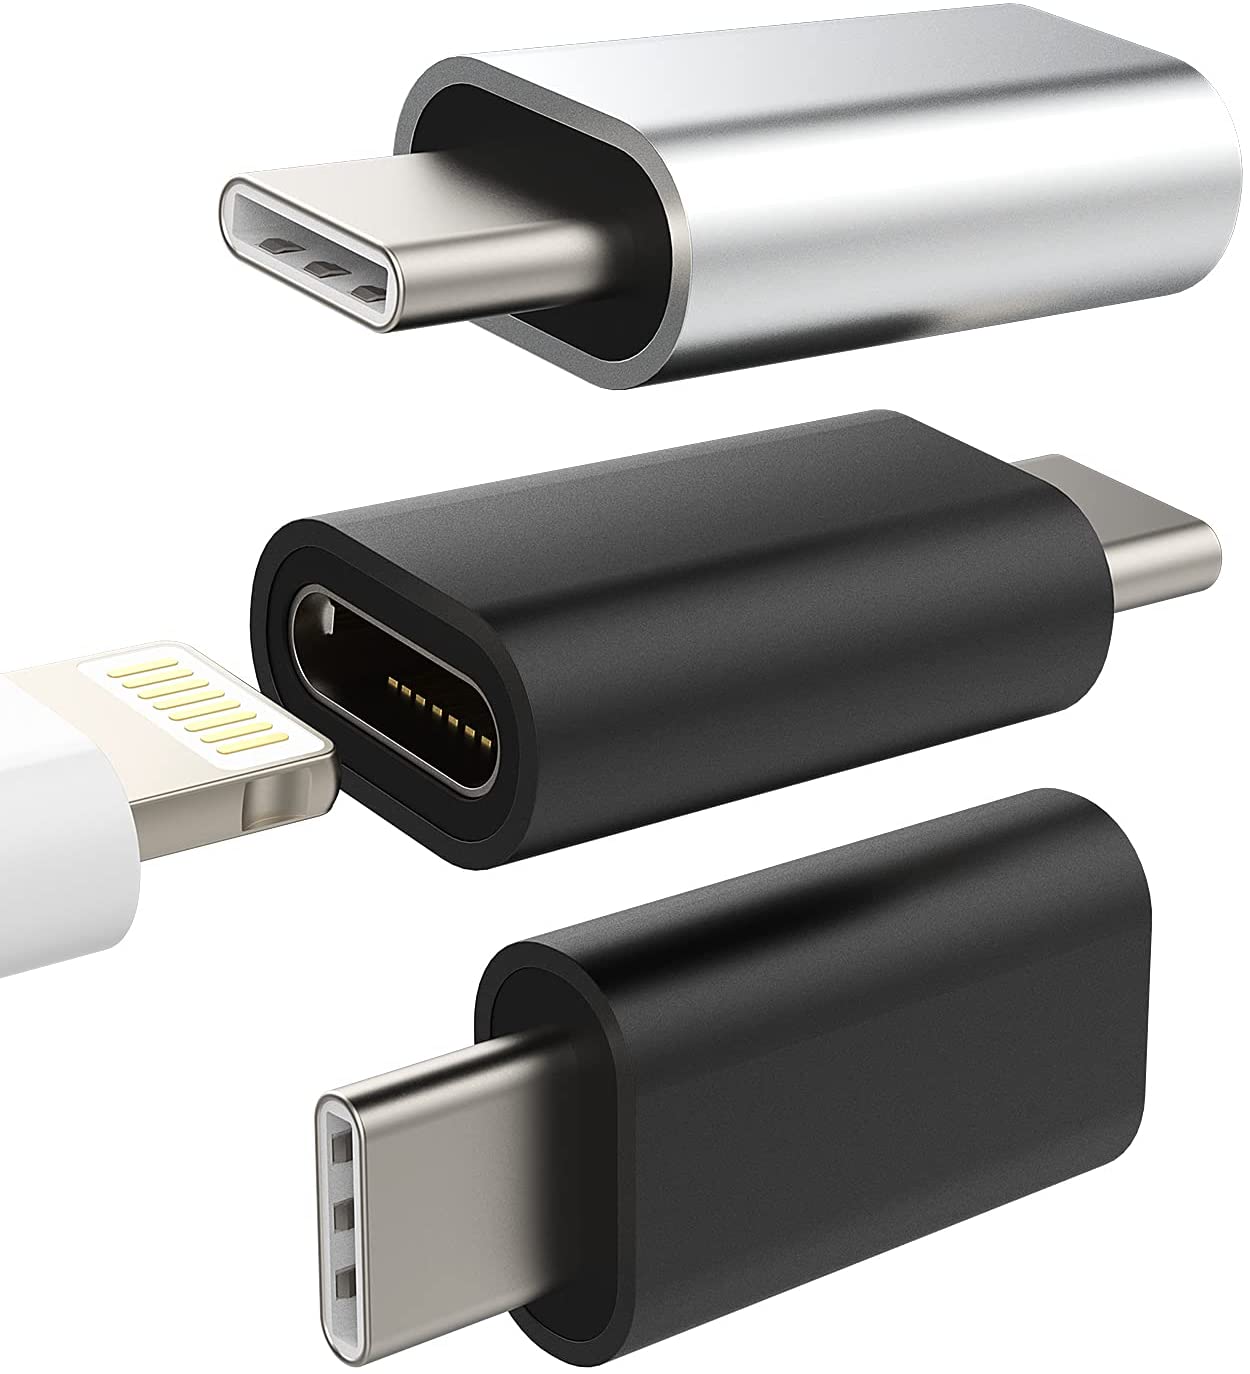 Fremmed igen Dalset Best USB-C To Lightning Adapters For iPad And iPhone - iOS Hacker